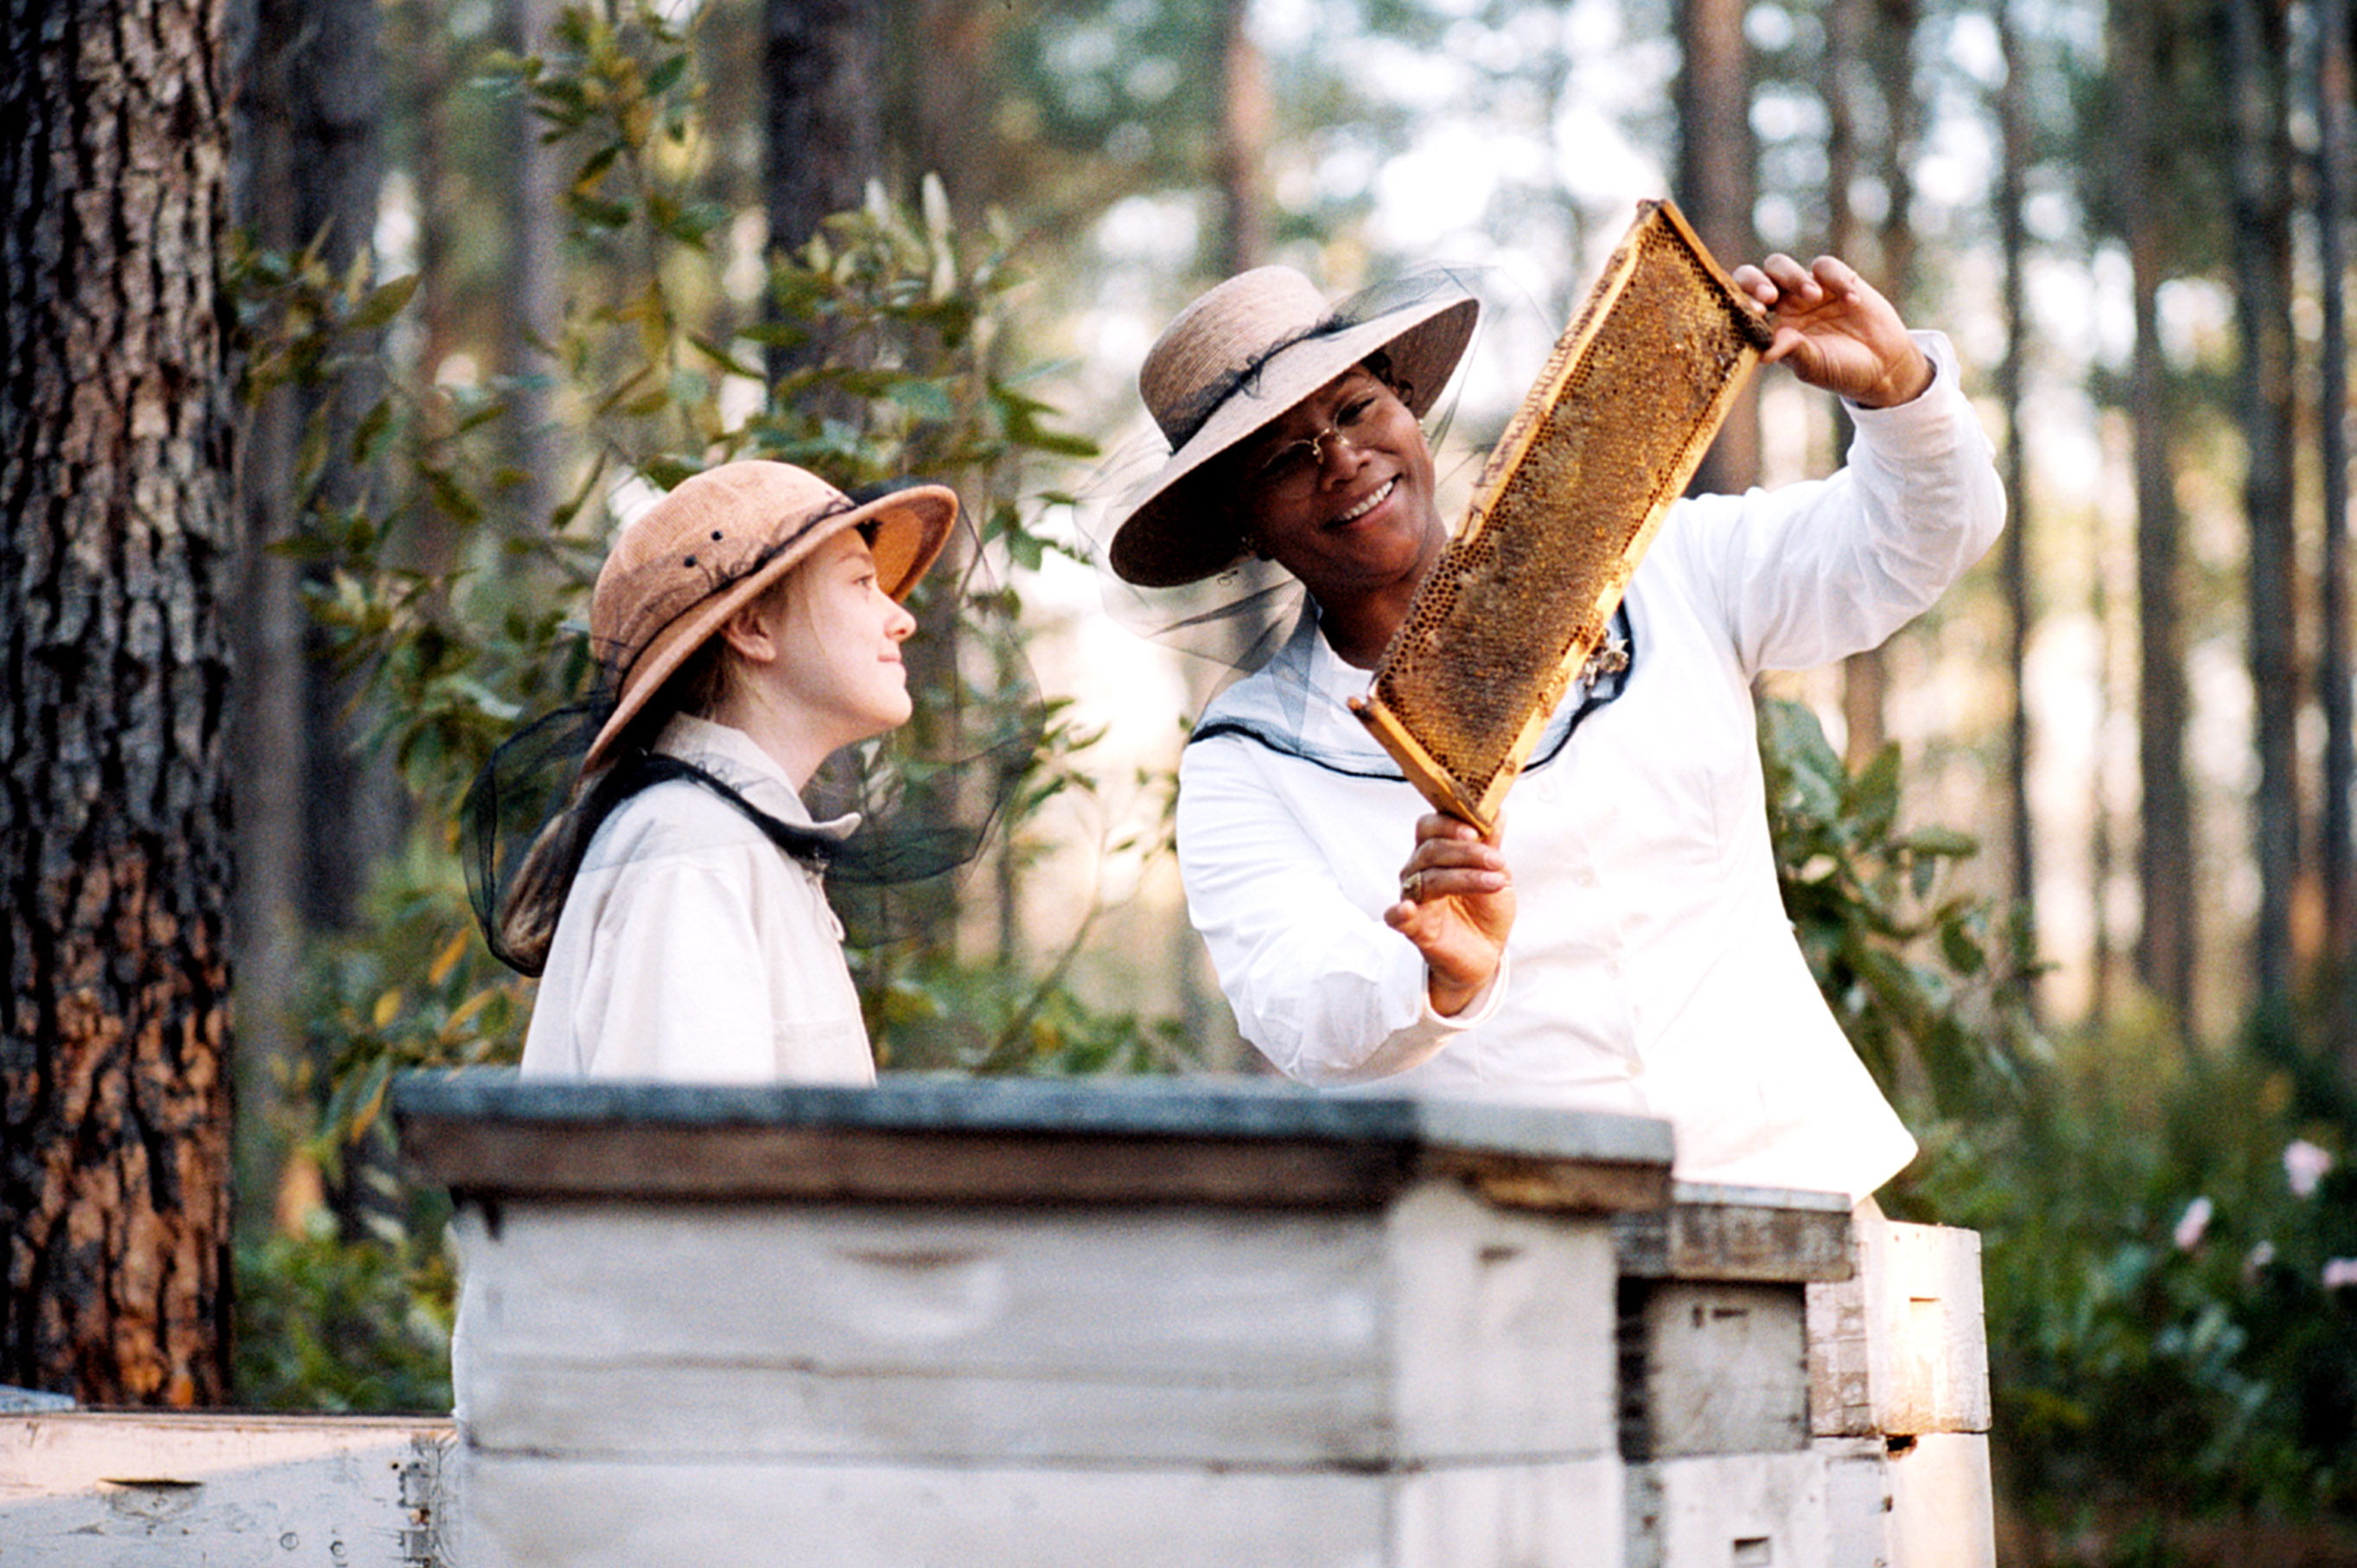 THE SECRET LIFE OF BEES, from left: Dakota Fanning, Queen Latifah, 2008, TM and ©Copyright Twentieth Century Fox. All Rights Reserved./Courtesy Everett Collection